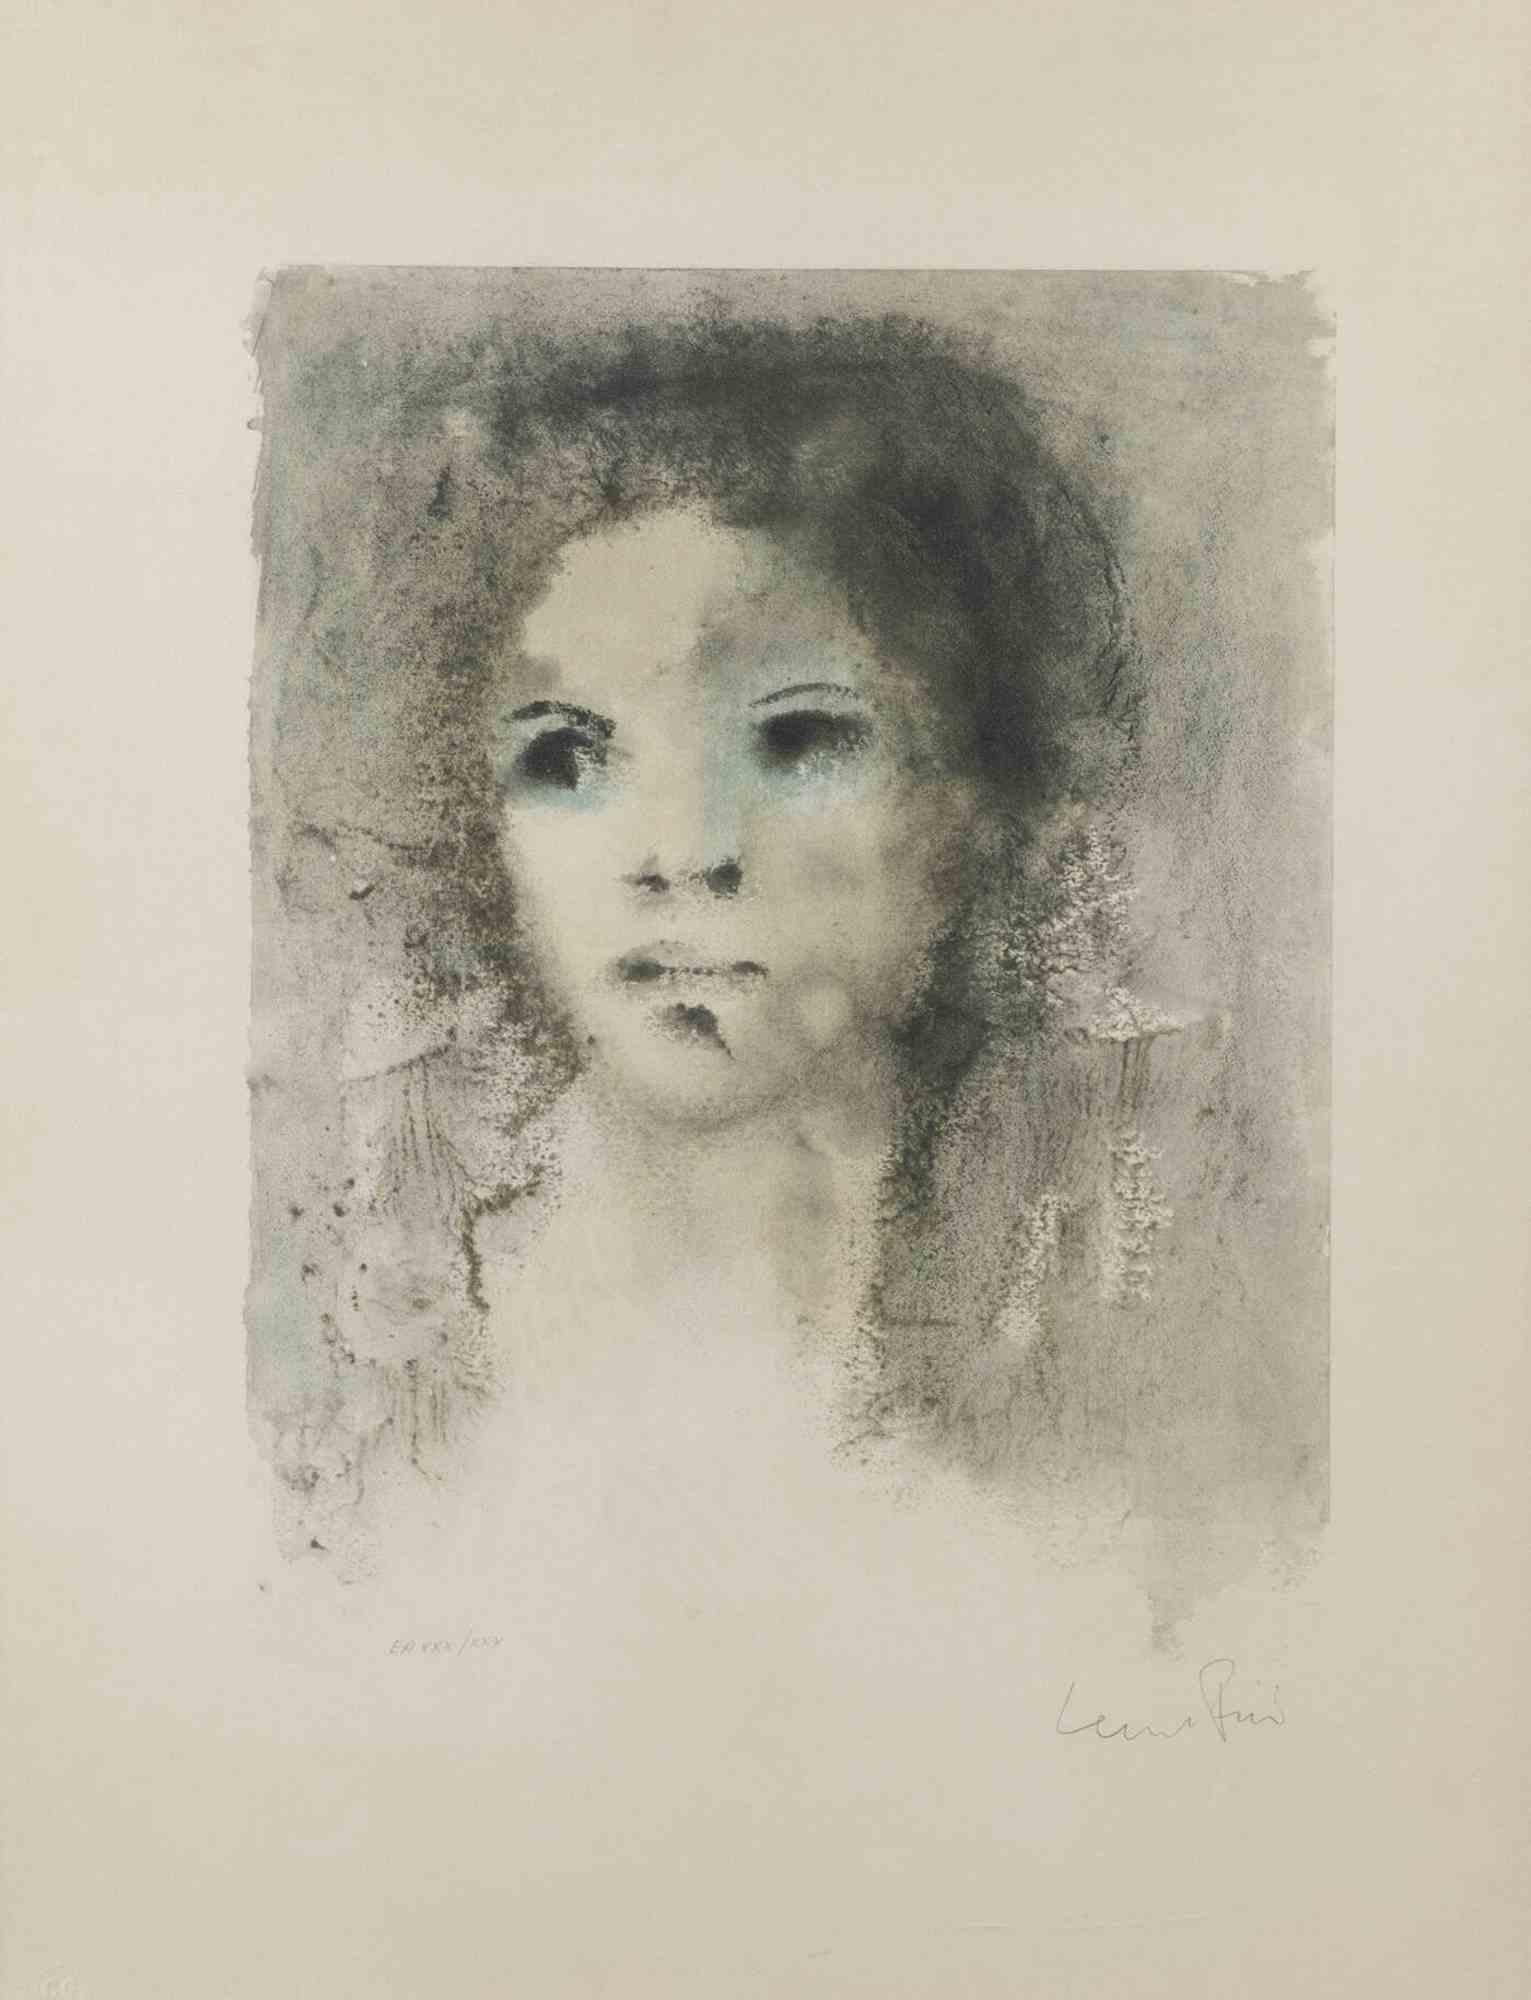 Female Face is an artwork realized by Leonor Fini in 1960 ca. 

61,5x47,5 sheet, 40x32 lithograph, specimen no. EA XXX/XXX.

Work hand signed lower right, inscribed "EA" and numbered lower left (in pencil on the sheet).

Good conditions.

Leonor